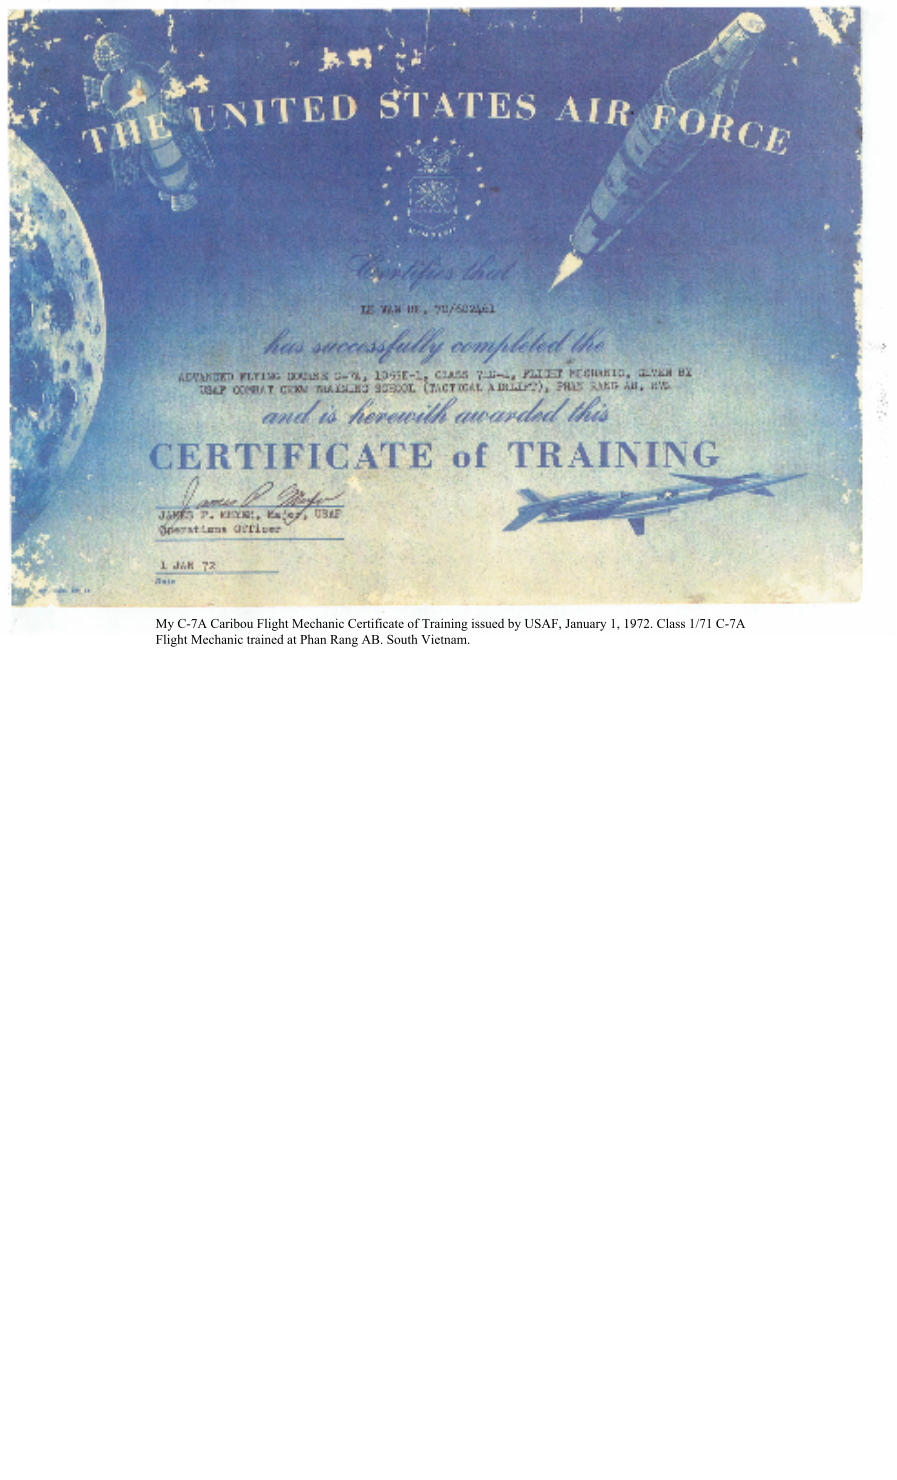 My C-7A Caribou Flight Mechanic Certificate of Training issued by USAF, January 1, 1972. Class 1/71 C-7A Flight Mechanic trained at Phan Rang AB. South Vietnam.